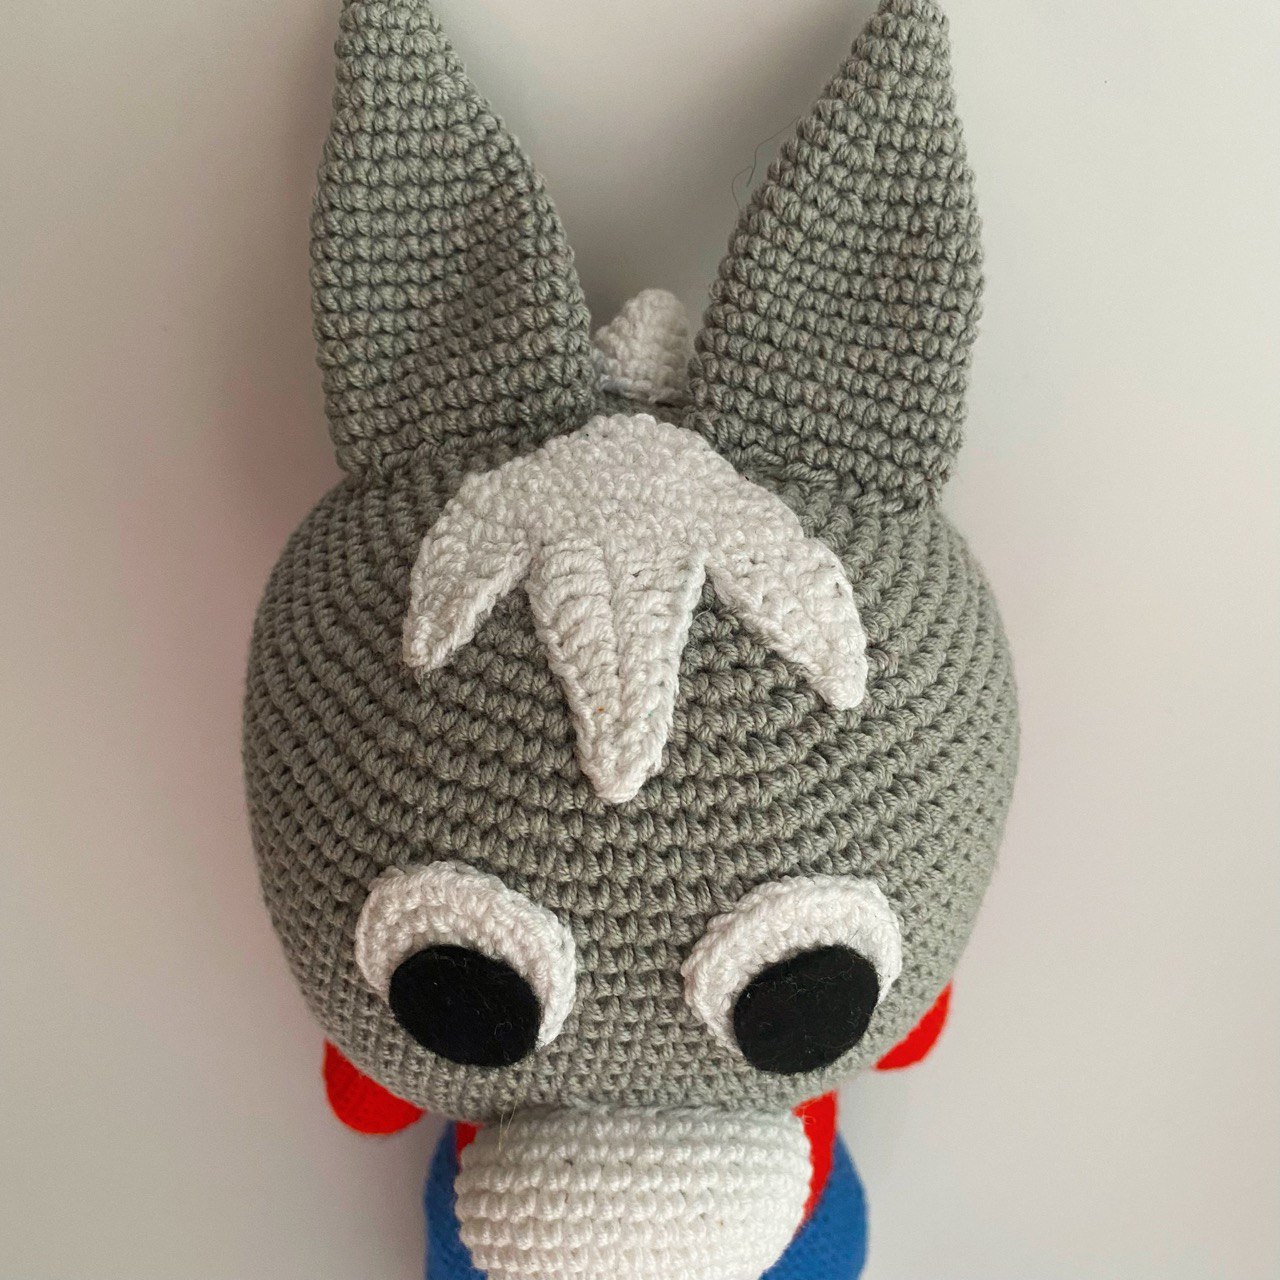 Trotro, the charming little crochet donkey, PDF file to download (in French)